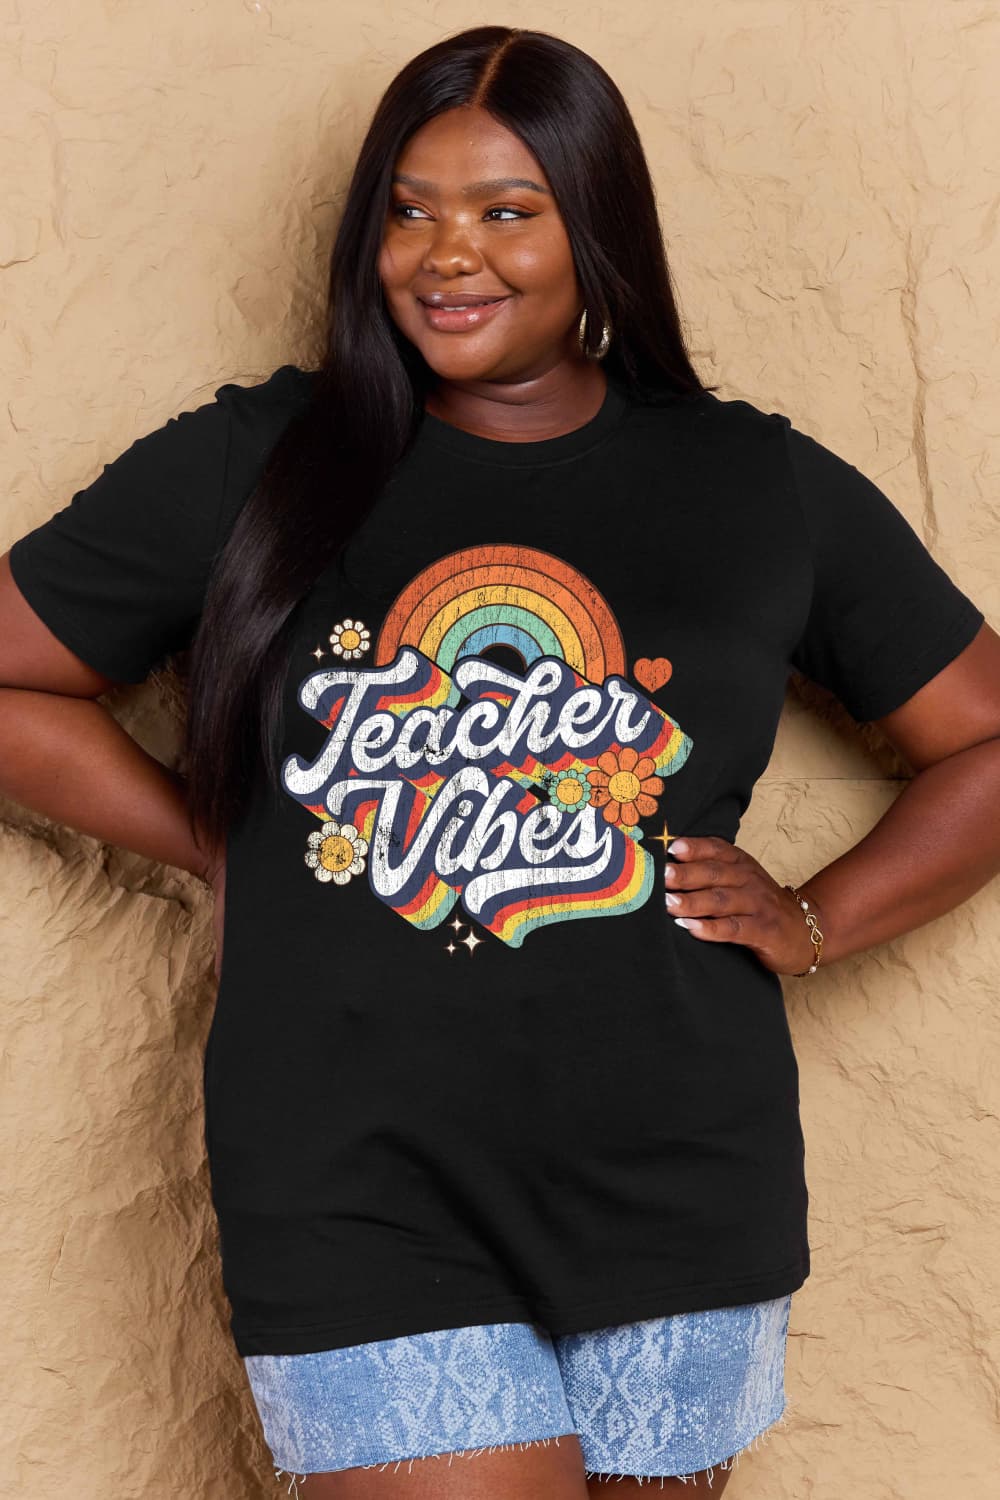 TEACHER VIBES Graphic Cotton T-Shirt - Mythical Kitty Boutique